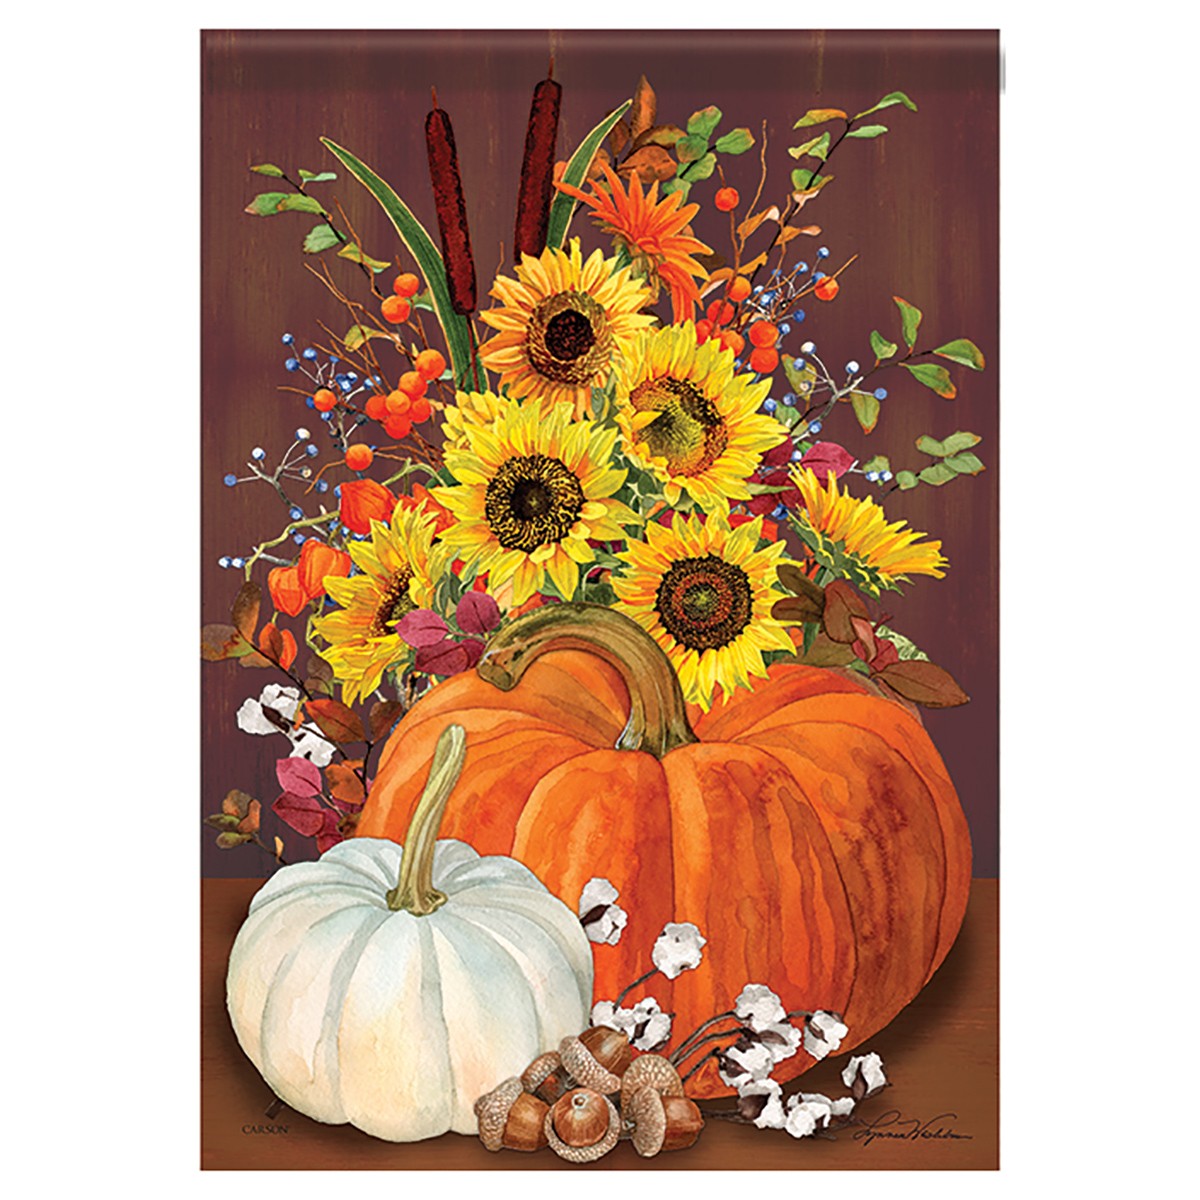 women’s conference fall bouquet | Atlantic Mission Region of the NALC